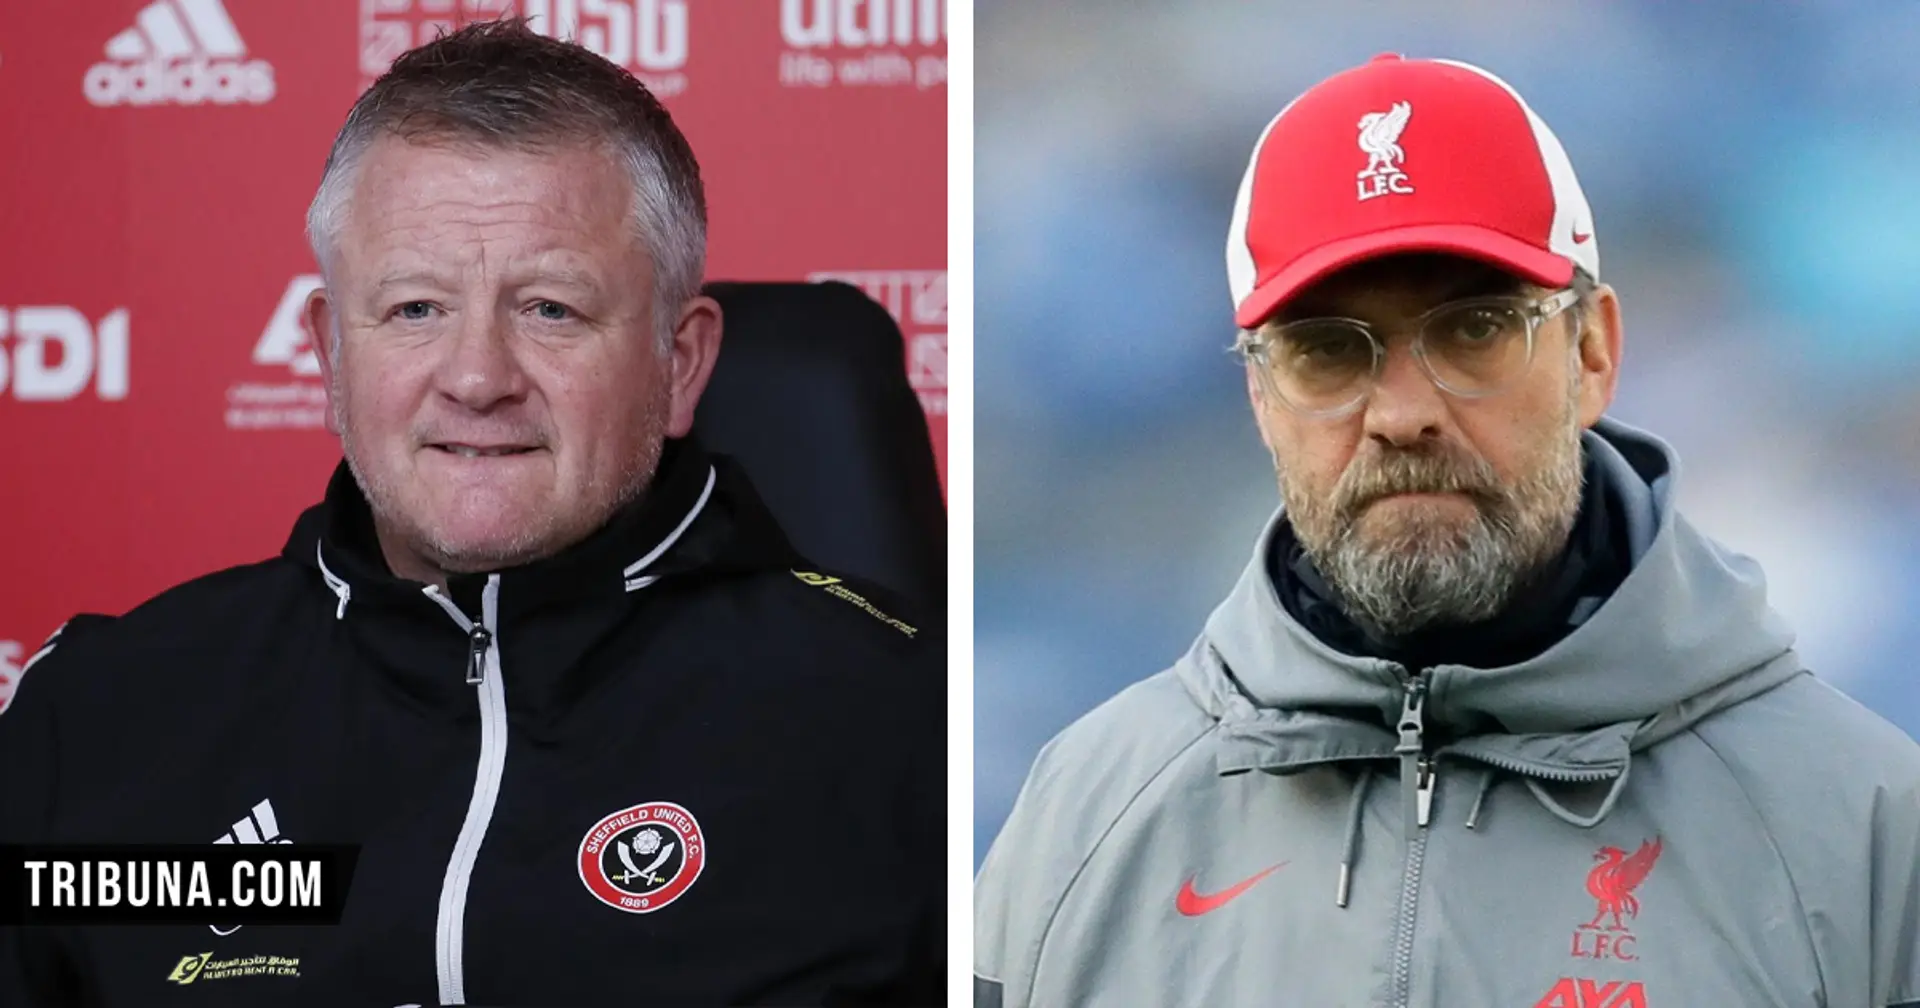 'We have to look after ourselves': Chris Wilder responds to Jurgen Klopp's 'selfish' claim